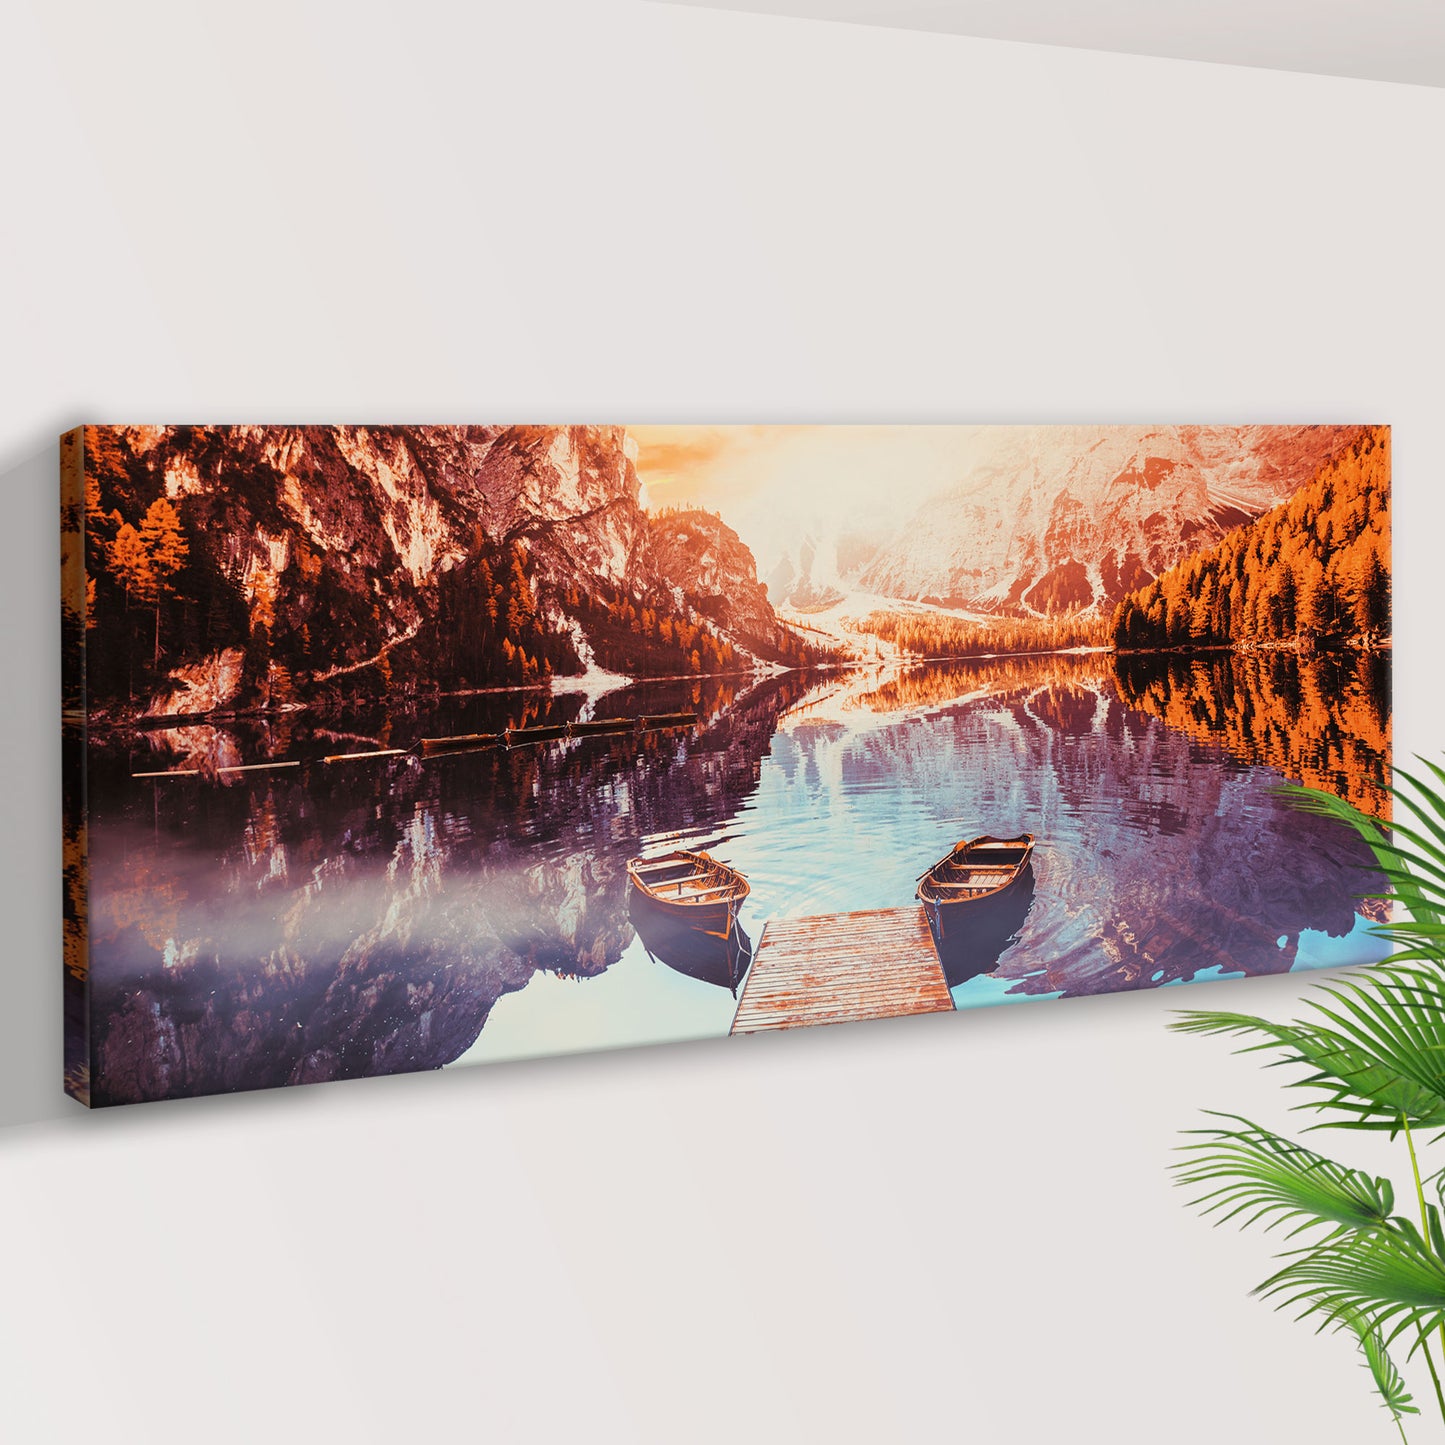 Sunset Reflection By The Lake Canvas Wall Art Style 1 - Image by Tailored Canvases